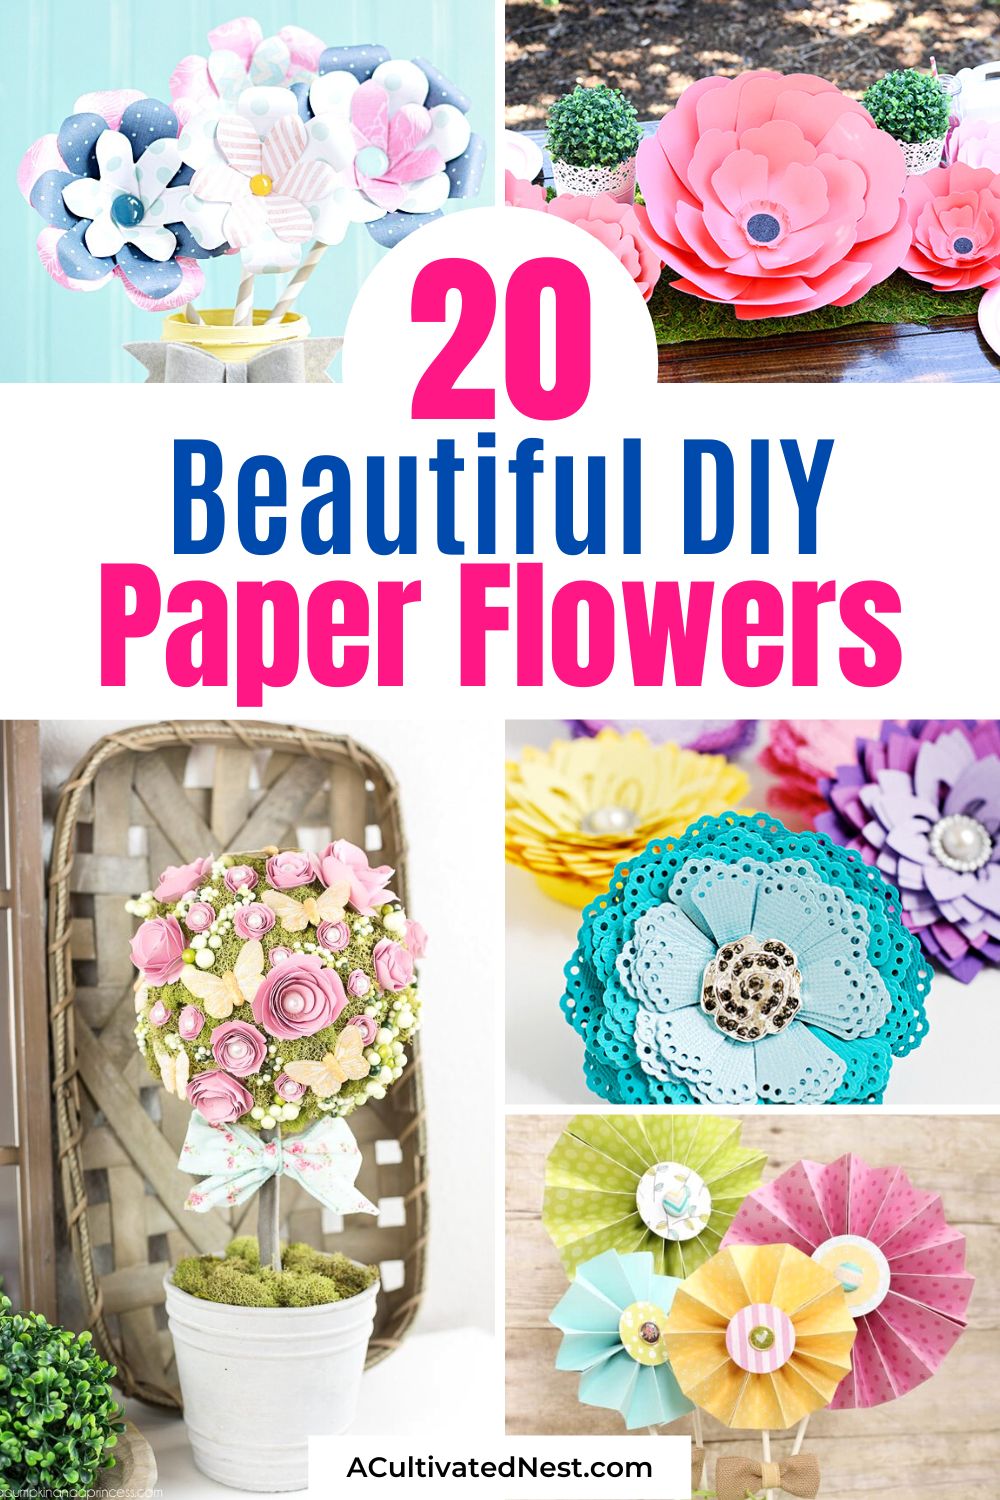 20 Beautiful Paper Flower Crafts- Bring bright colors into your home with these paper flower crafts! Don't worry about watering or sunlight with these easy faux flower DIYs! | #flowerCraft #diyProjects #fauxFlowers #paperFlowers #ACultivatedNest